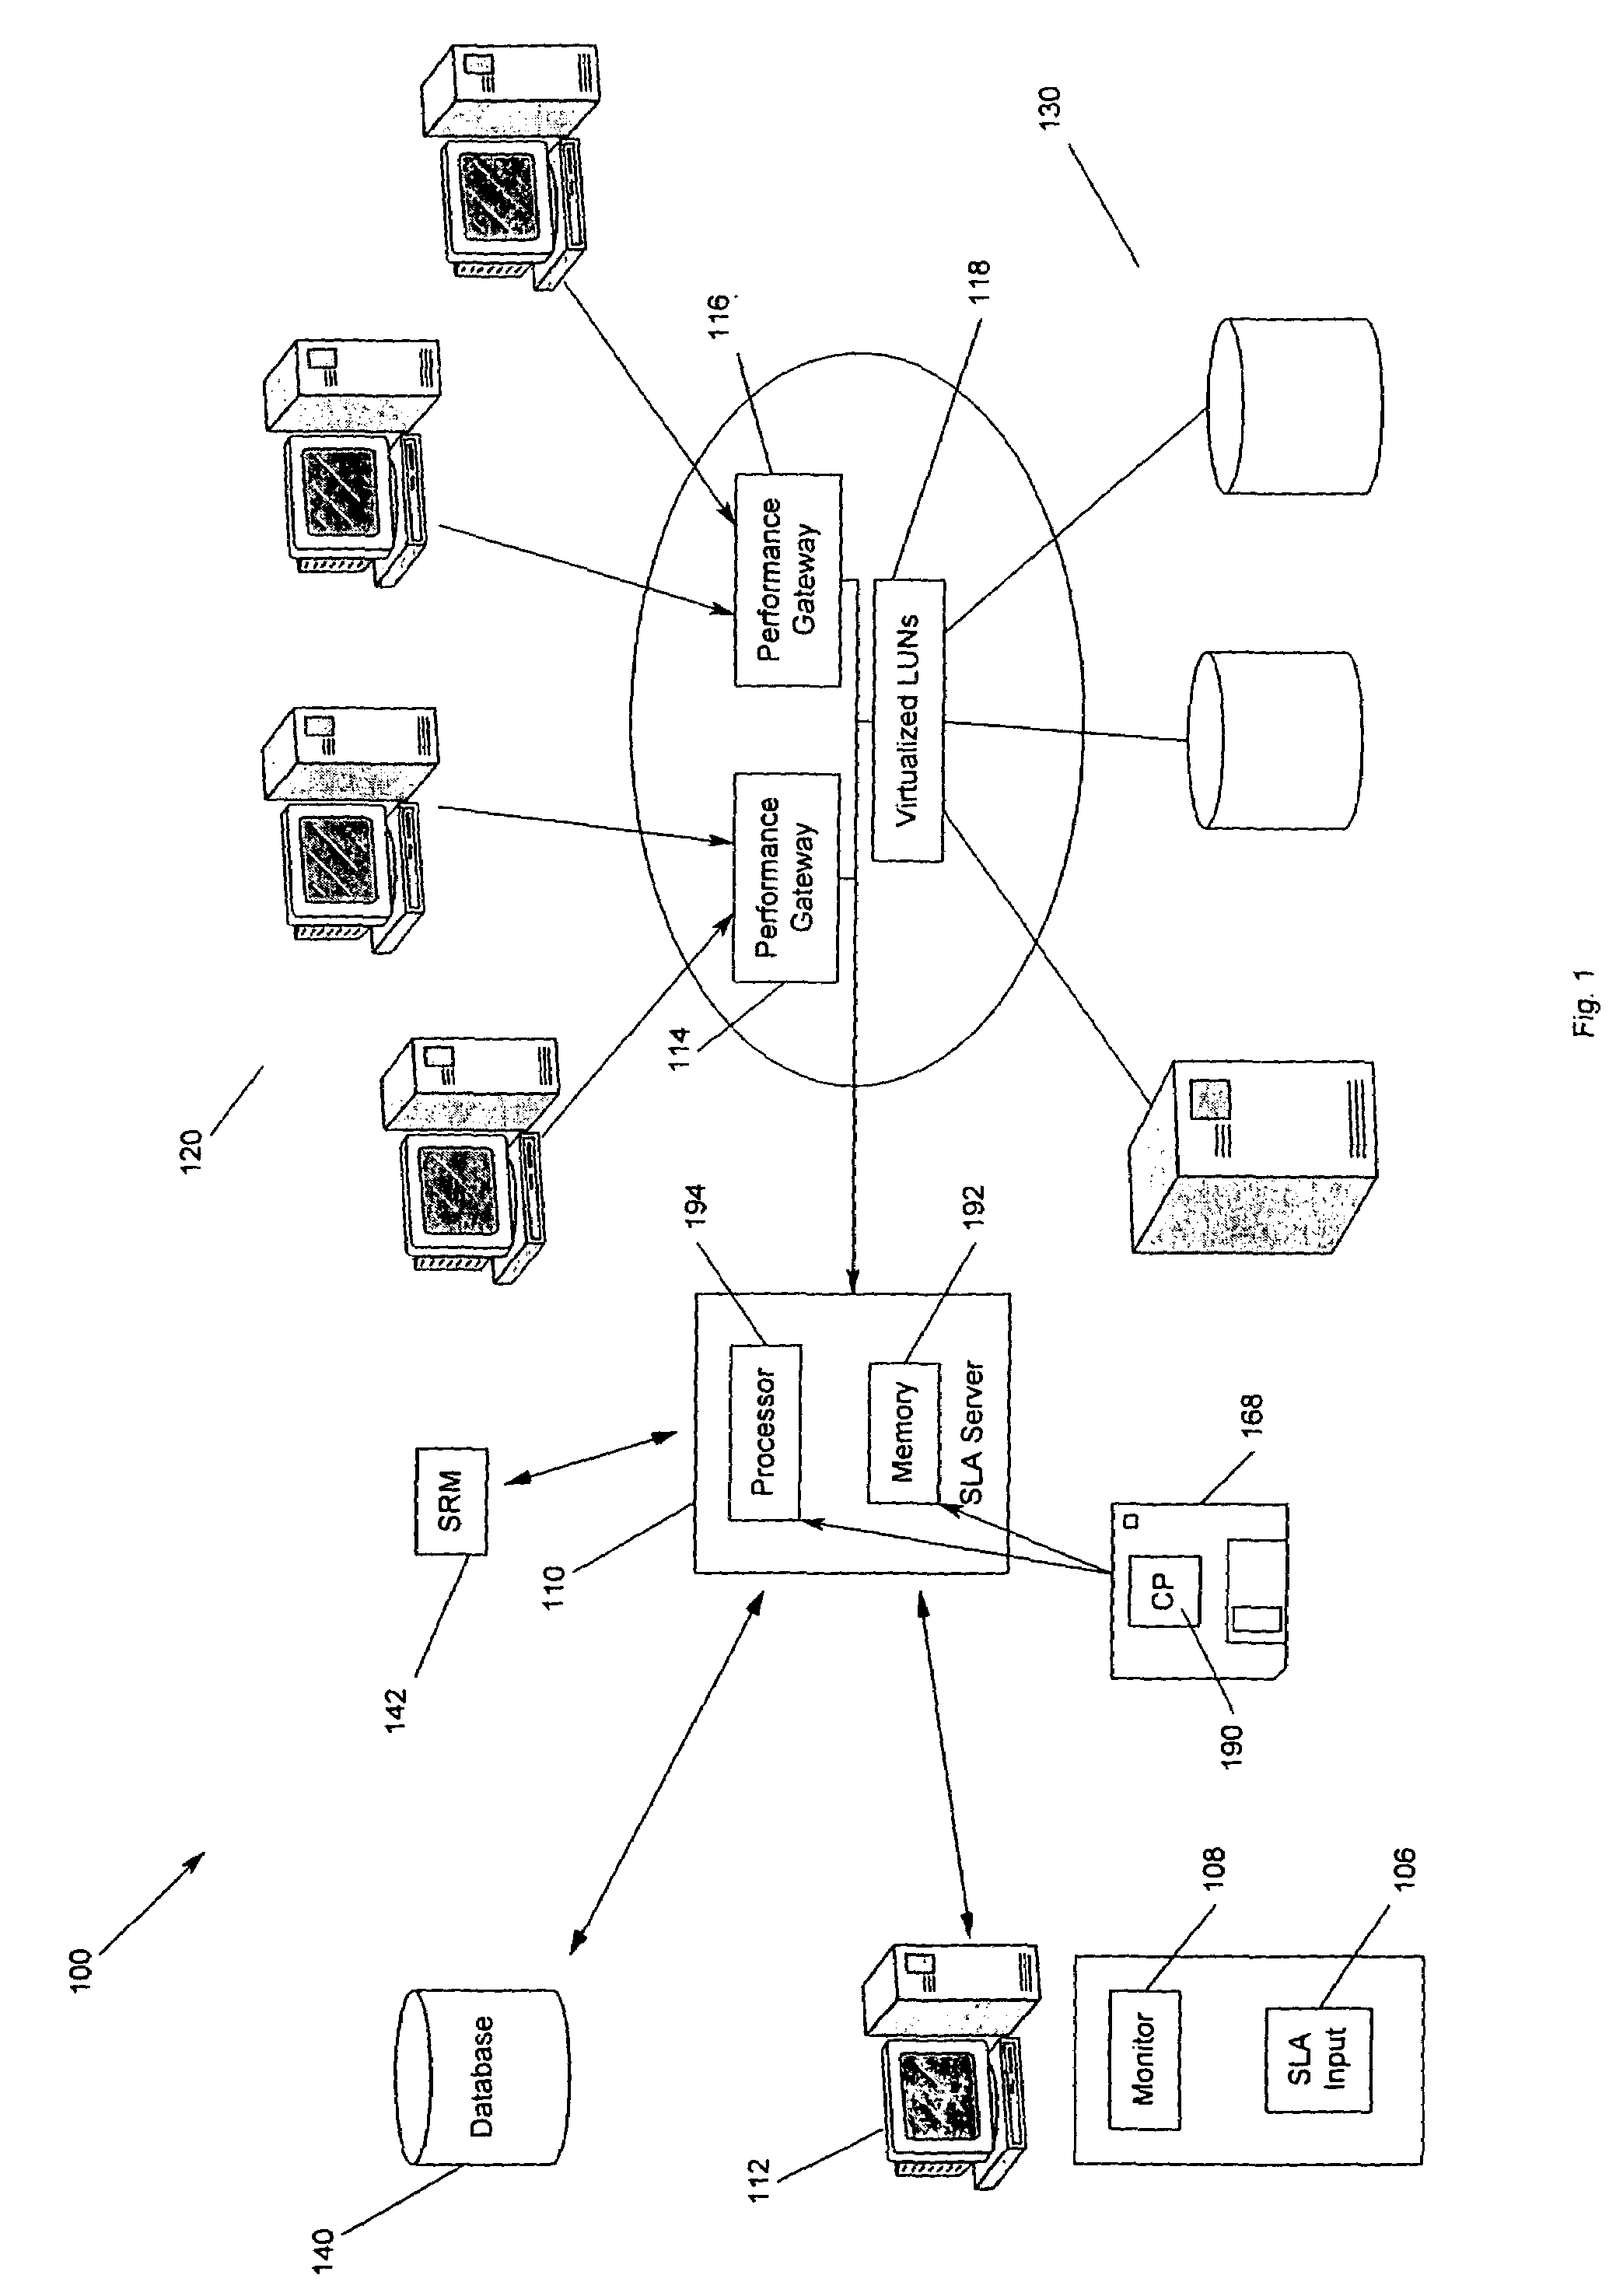 Method for improving performance in a computer storage system by regulating resource requests from clients